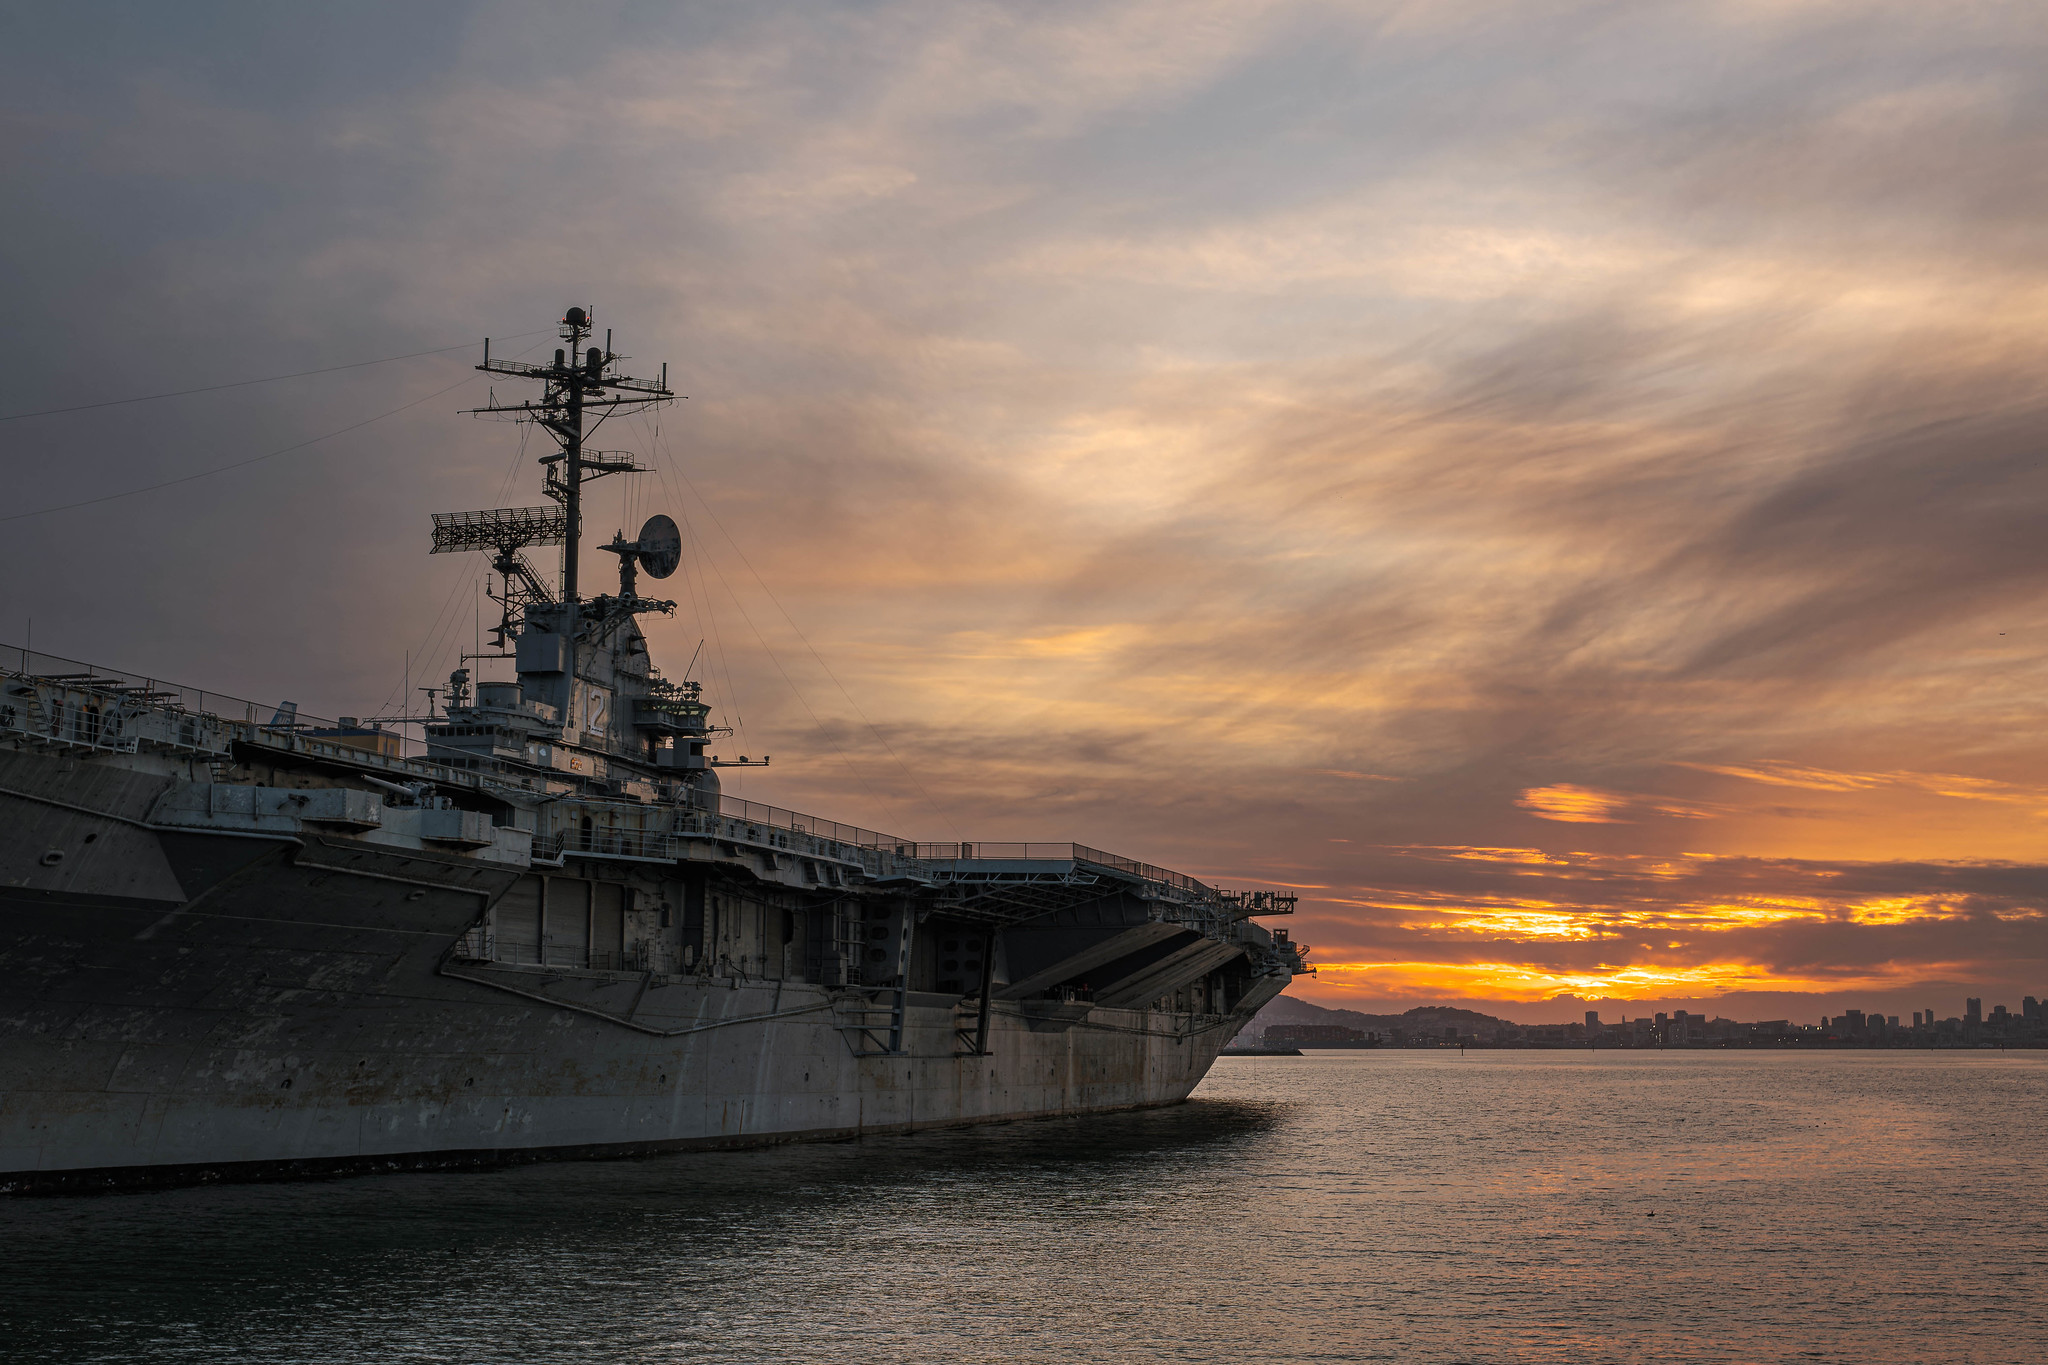 The USS Hornet, which had been host to the Marine Cloud Brightening Project (MCBP) experiment. Photo: Tim Waters/Flickr